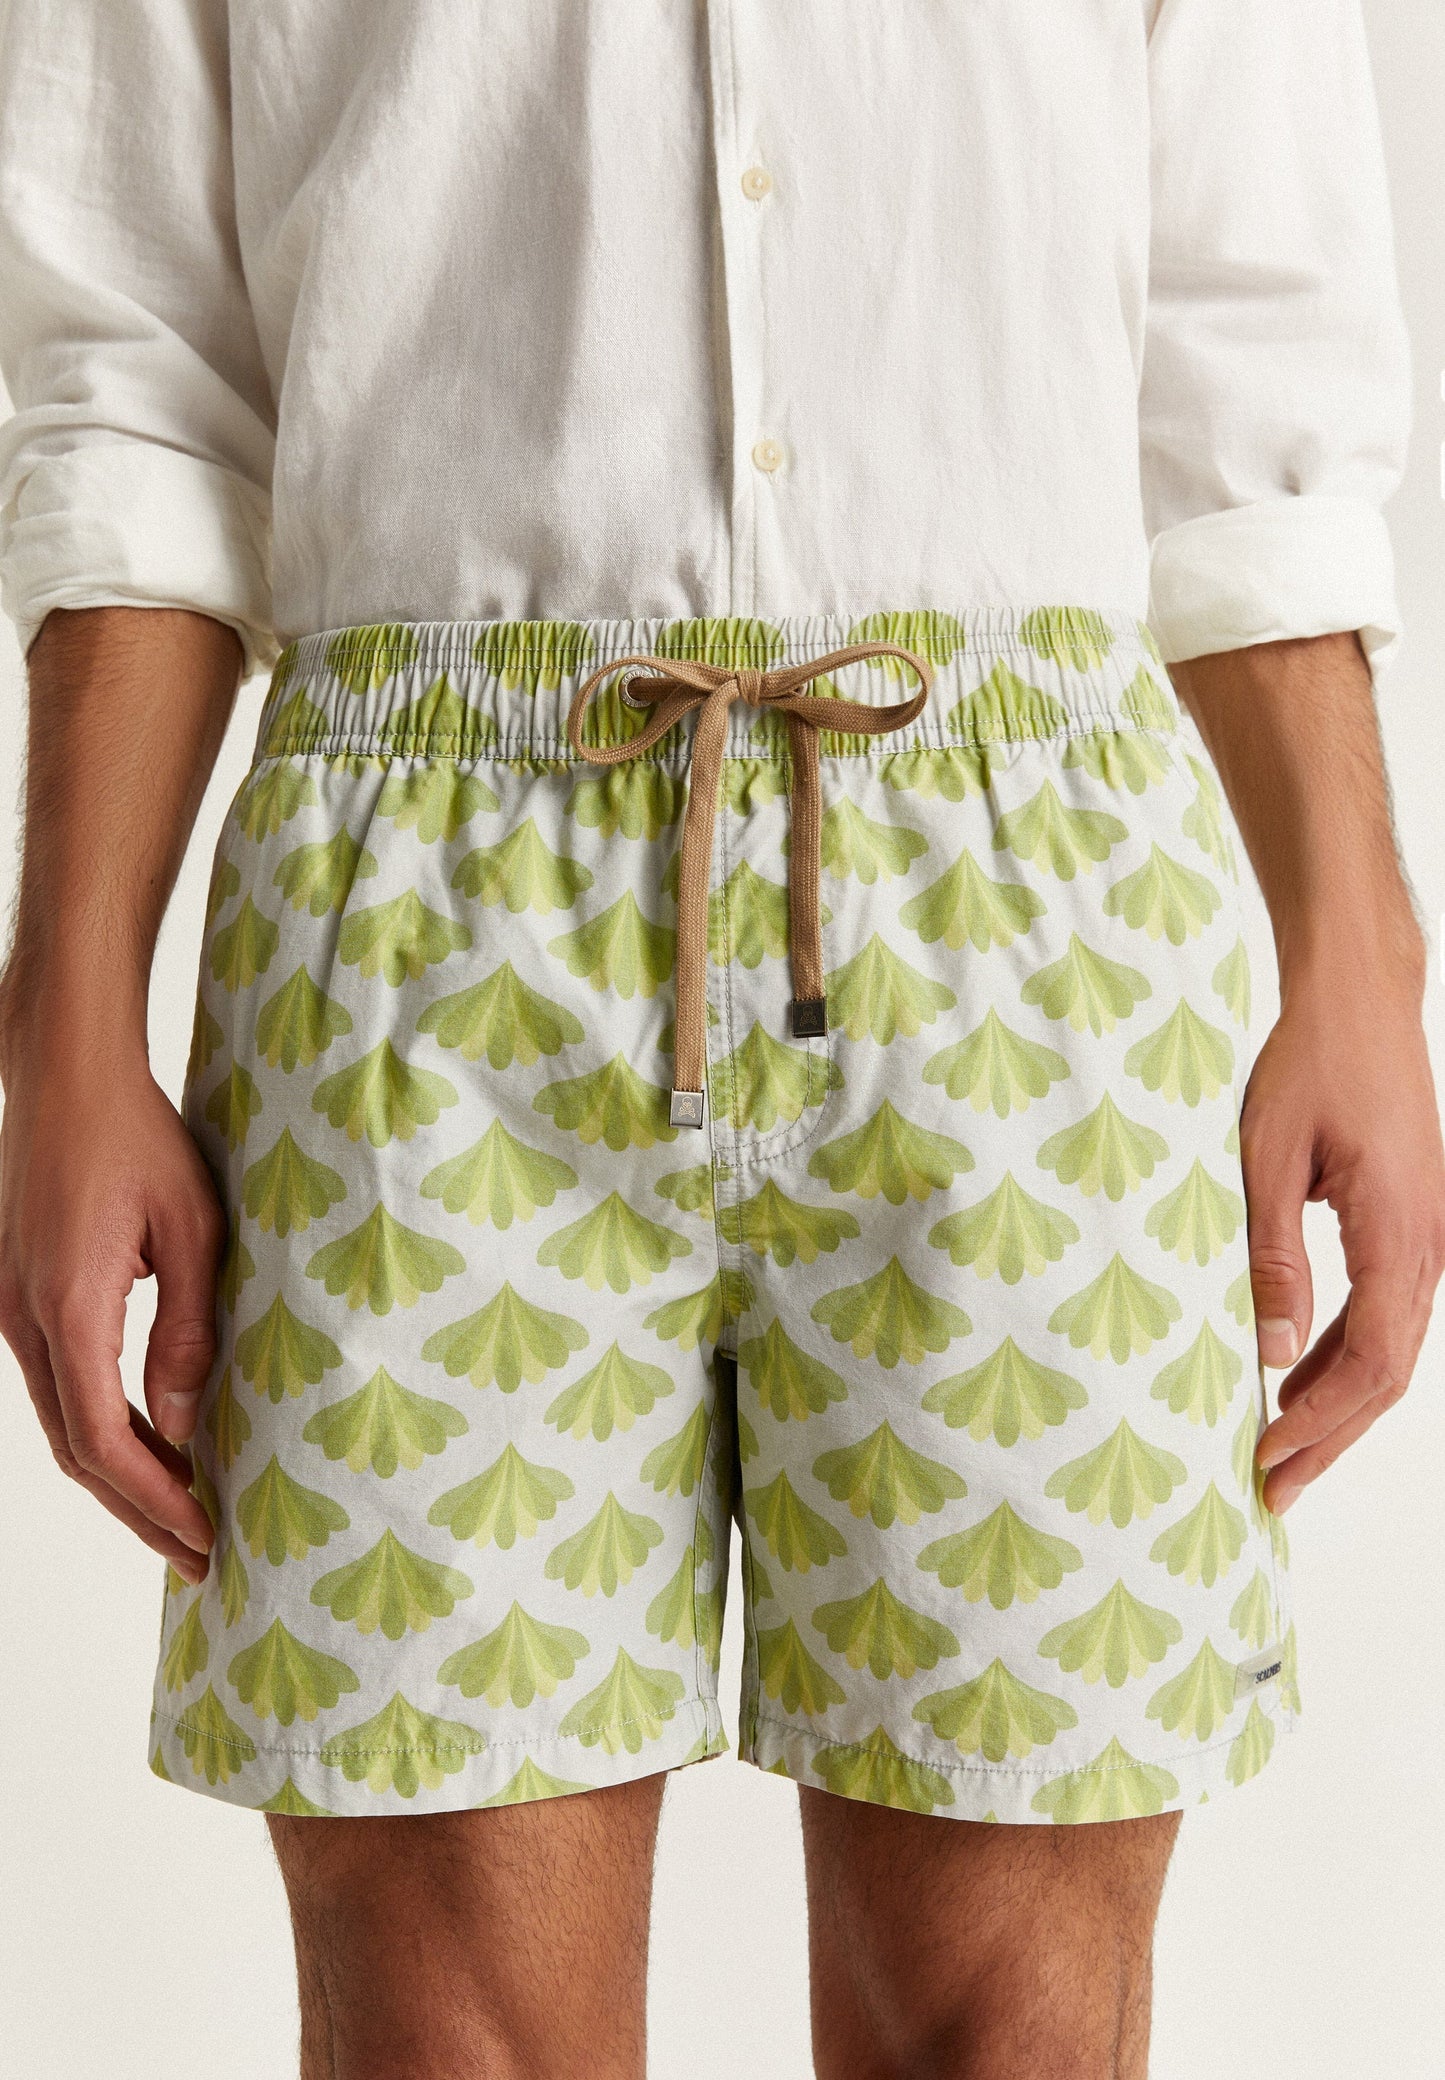 SWIMMING TRUNKS WITH LEAF PRINT